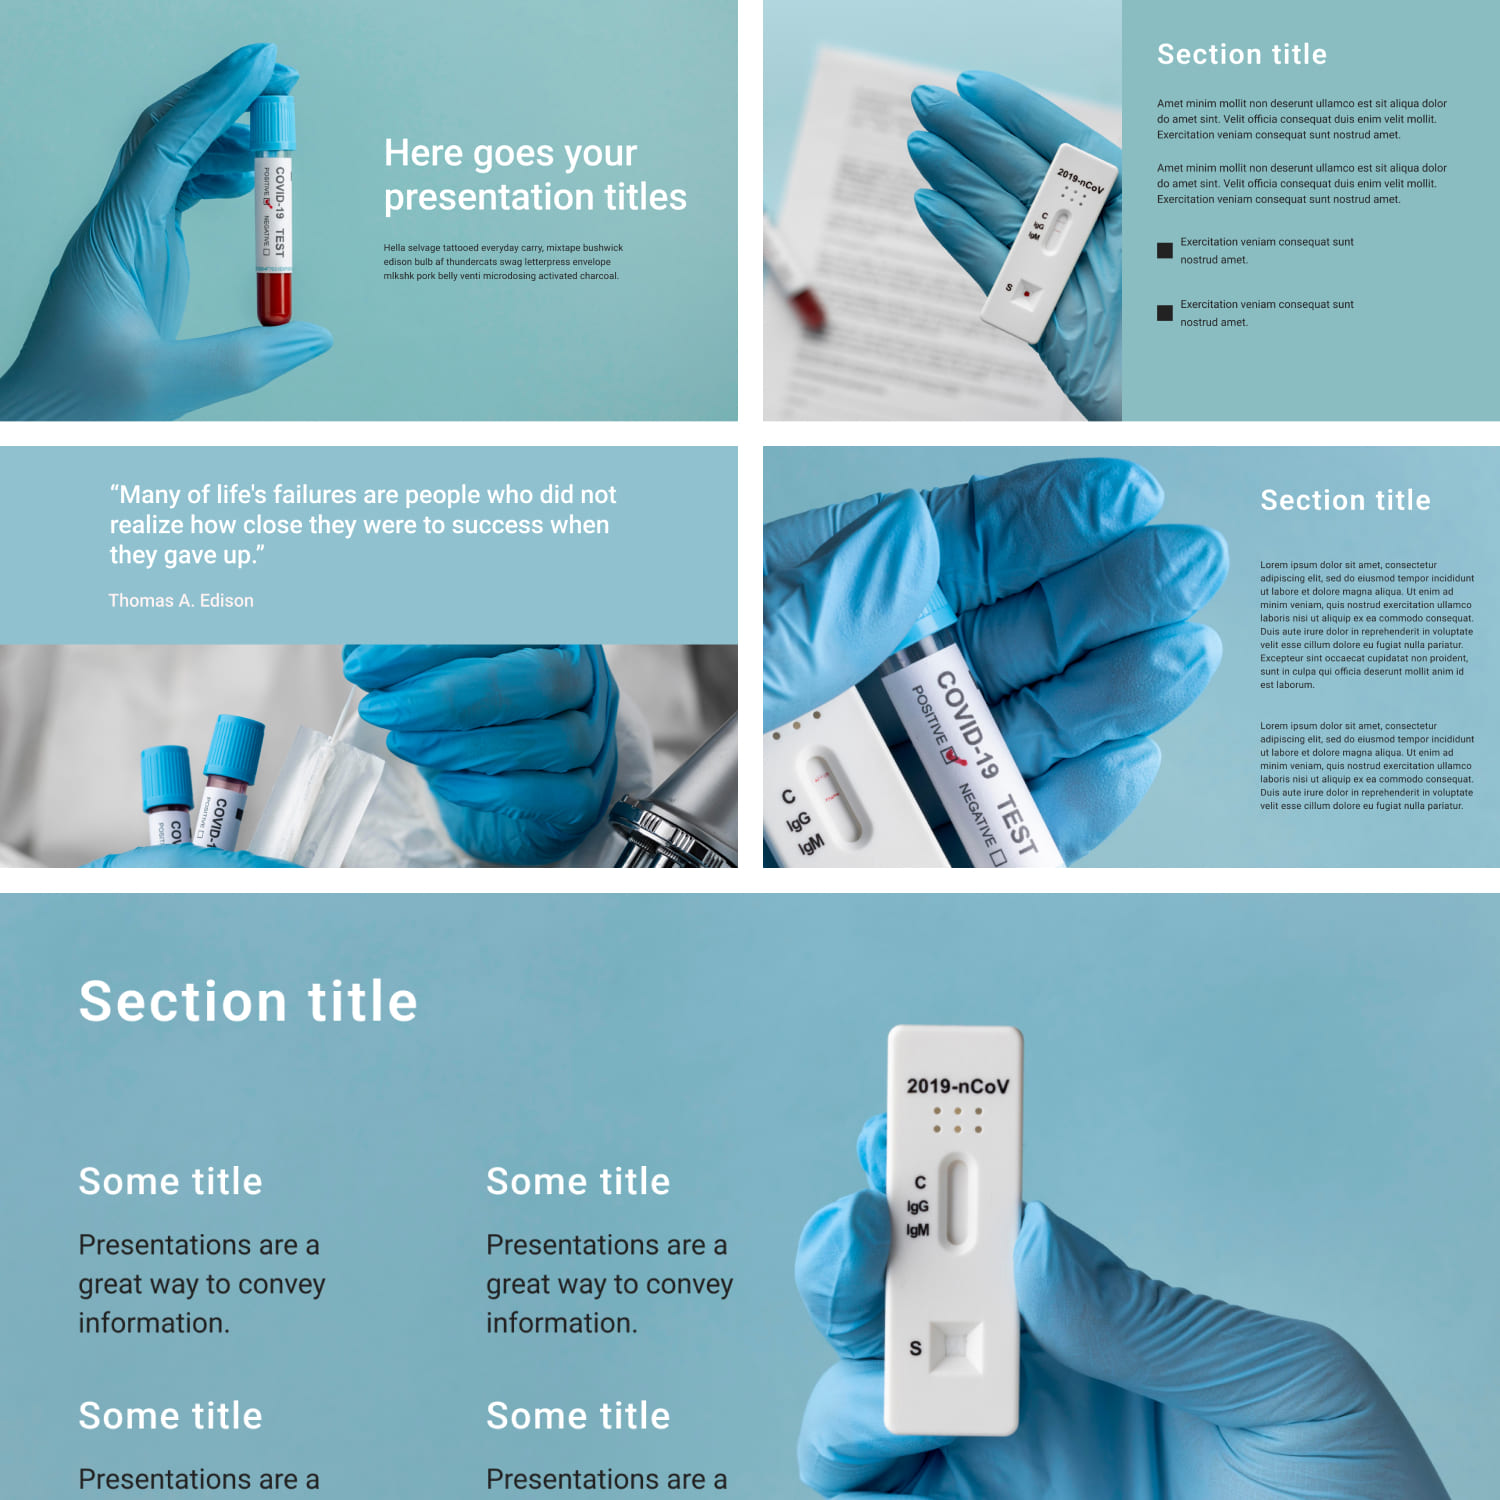 Covid 19 Vaccine Powerpoint Template Free 1500x1500 2.